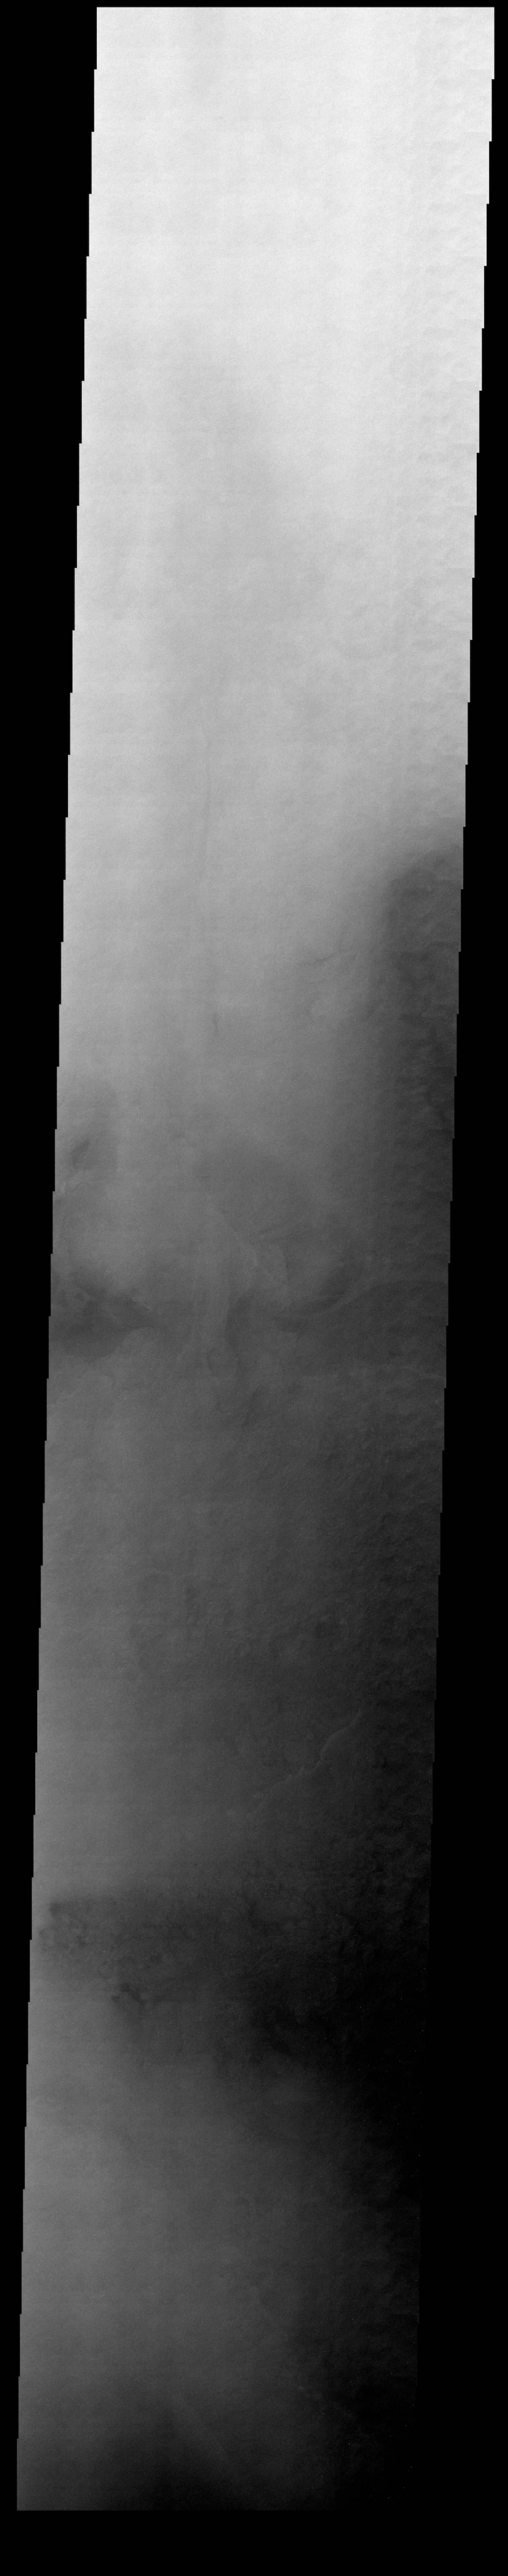 Dust obscures surface of Mars 